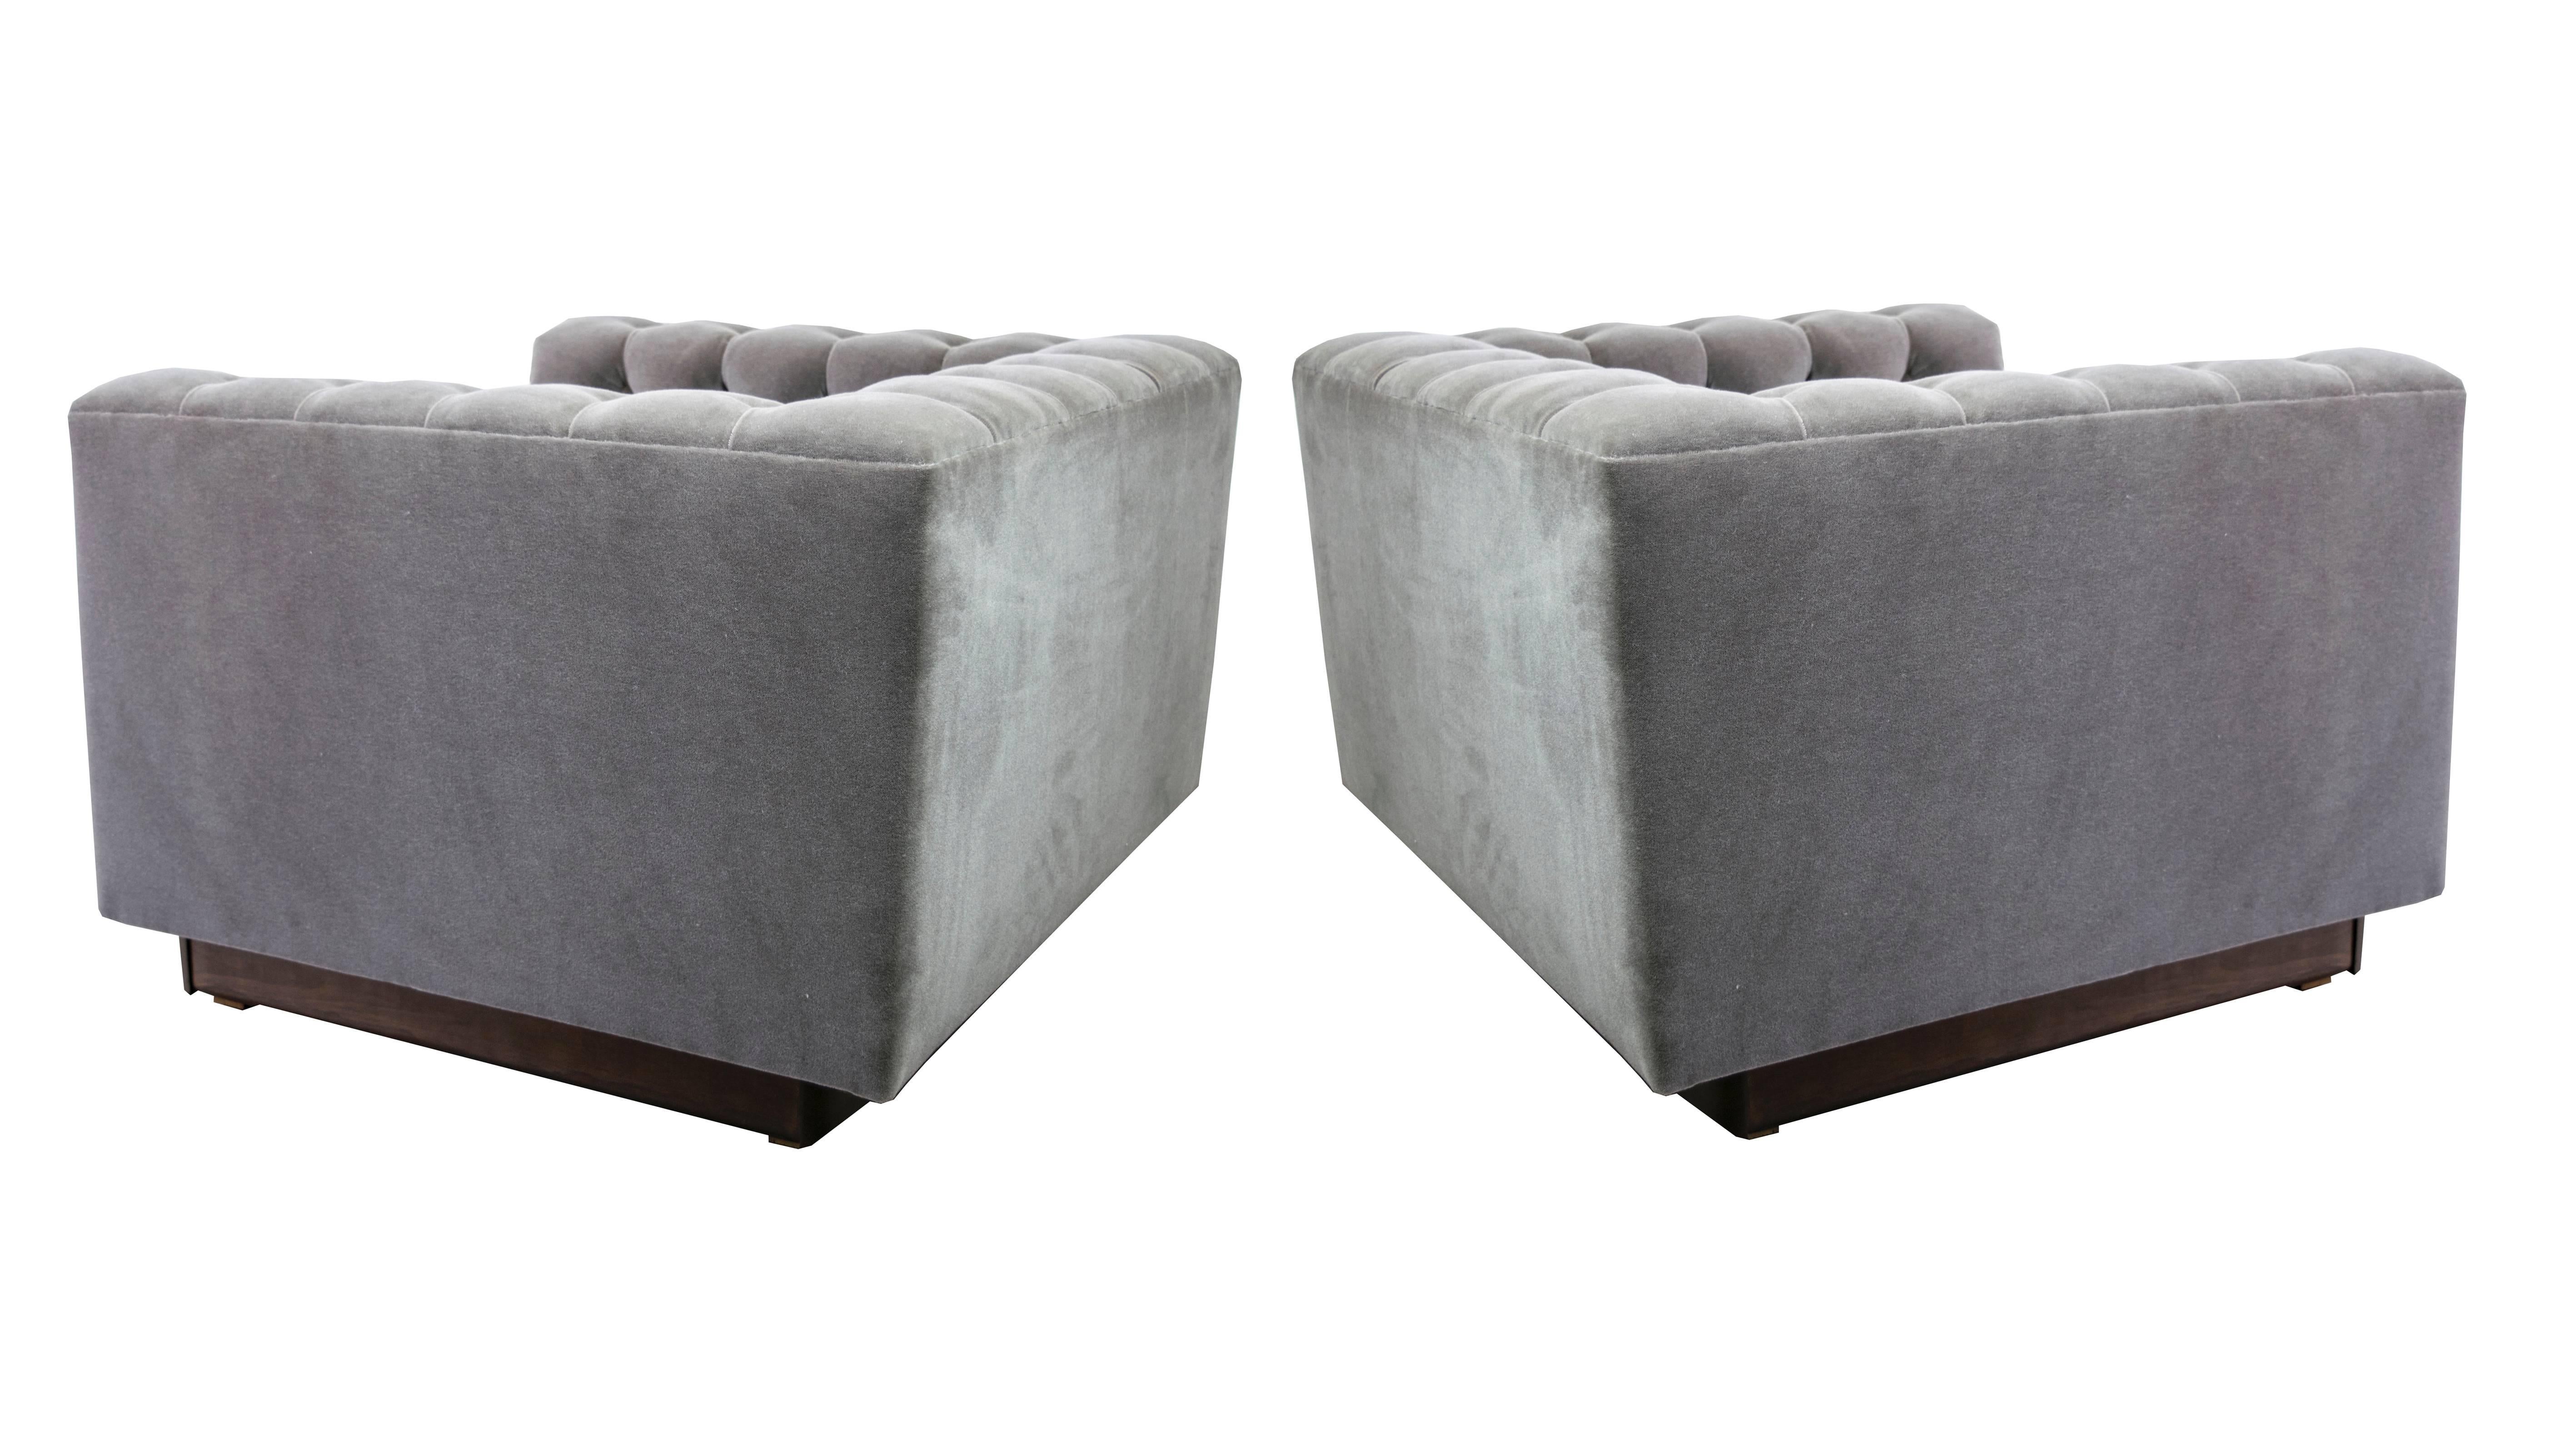 Mid-Century Modern Oversized Milo Baughman Tufted Lounge Chairs in Smoky Gray Mohair For Sale